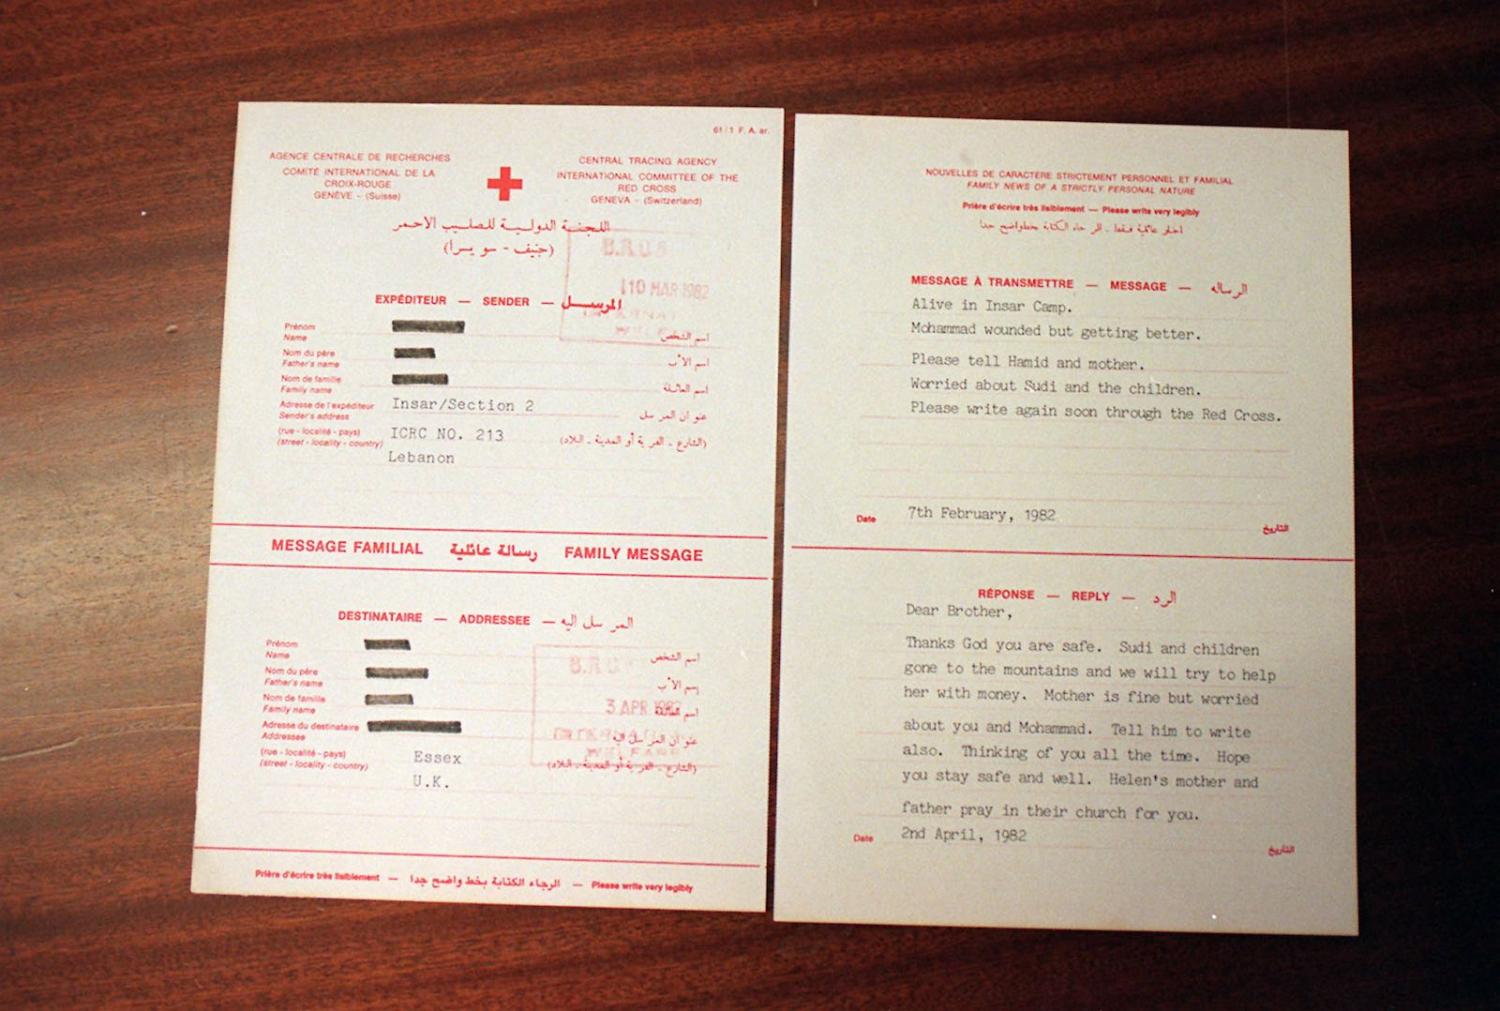 Message forms for the protection of POWs under the Geneva Conventions (Photo: Michael Stephens via Getty)